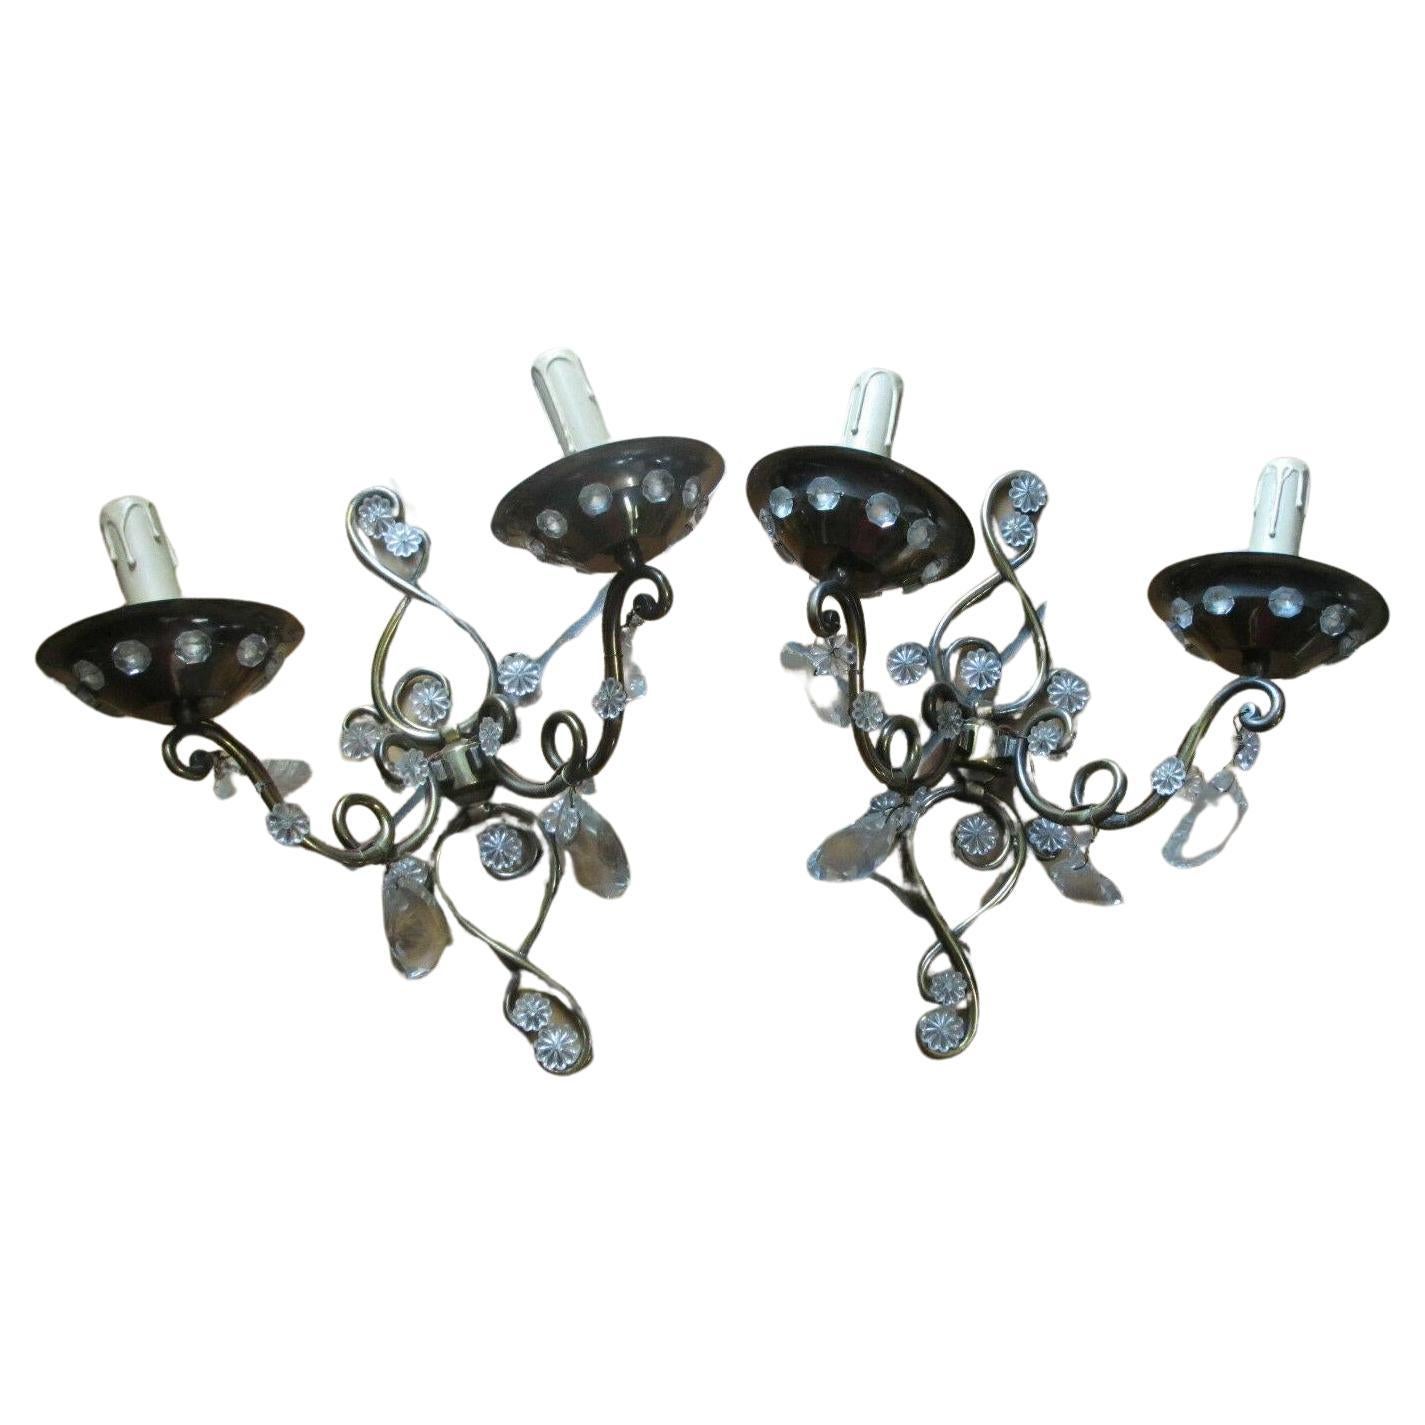 c1925 French Art Deco attrib. Maison Bagues Crystal/ Scrolled Iron Wall Sconces For Sale